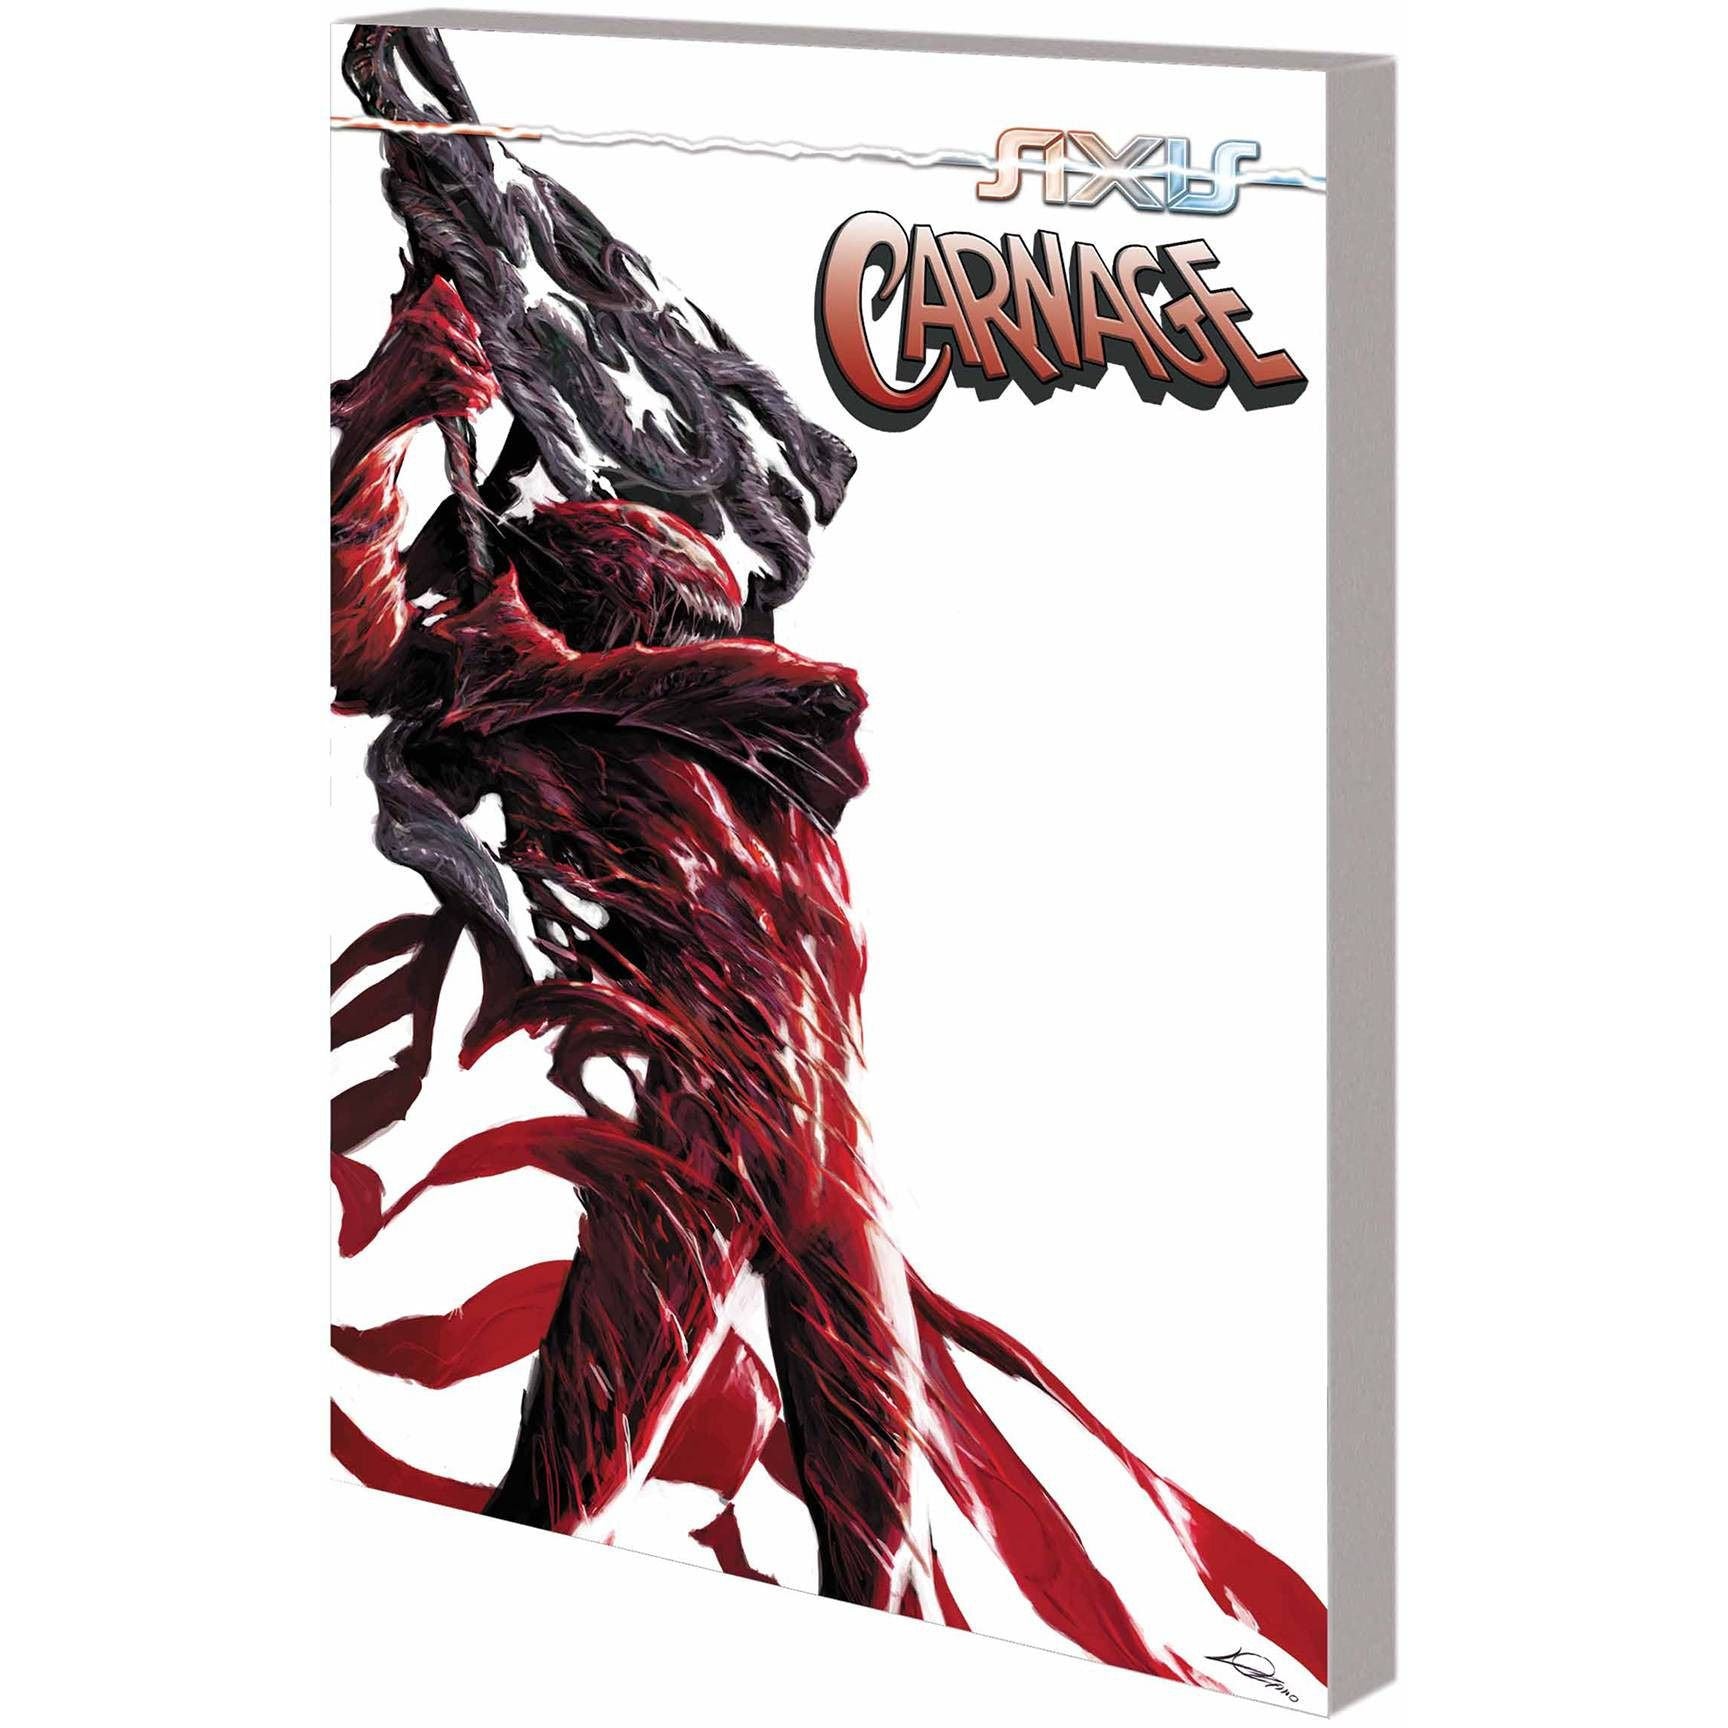  AXIS CARNAGE AND HOBGOBLIN TP Uncanny!